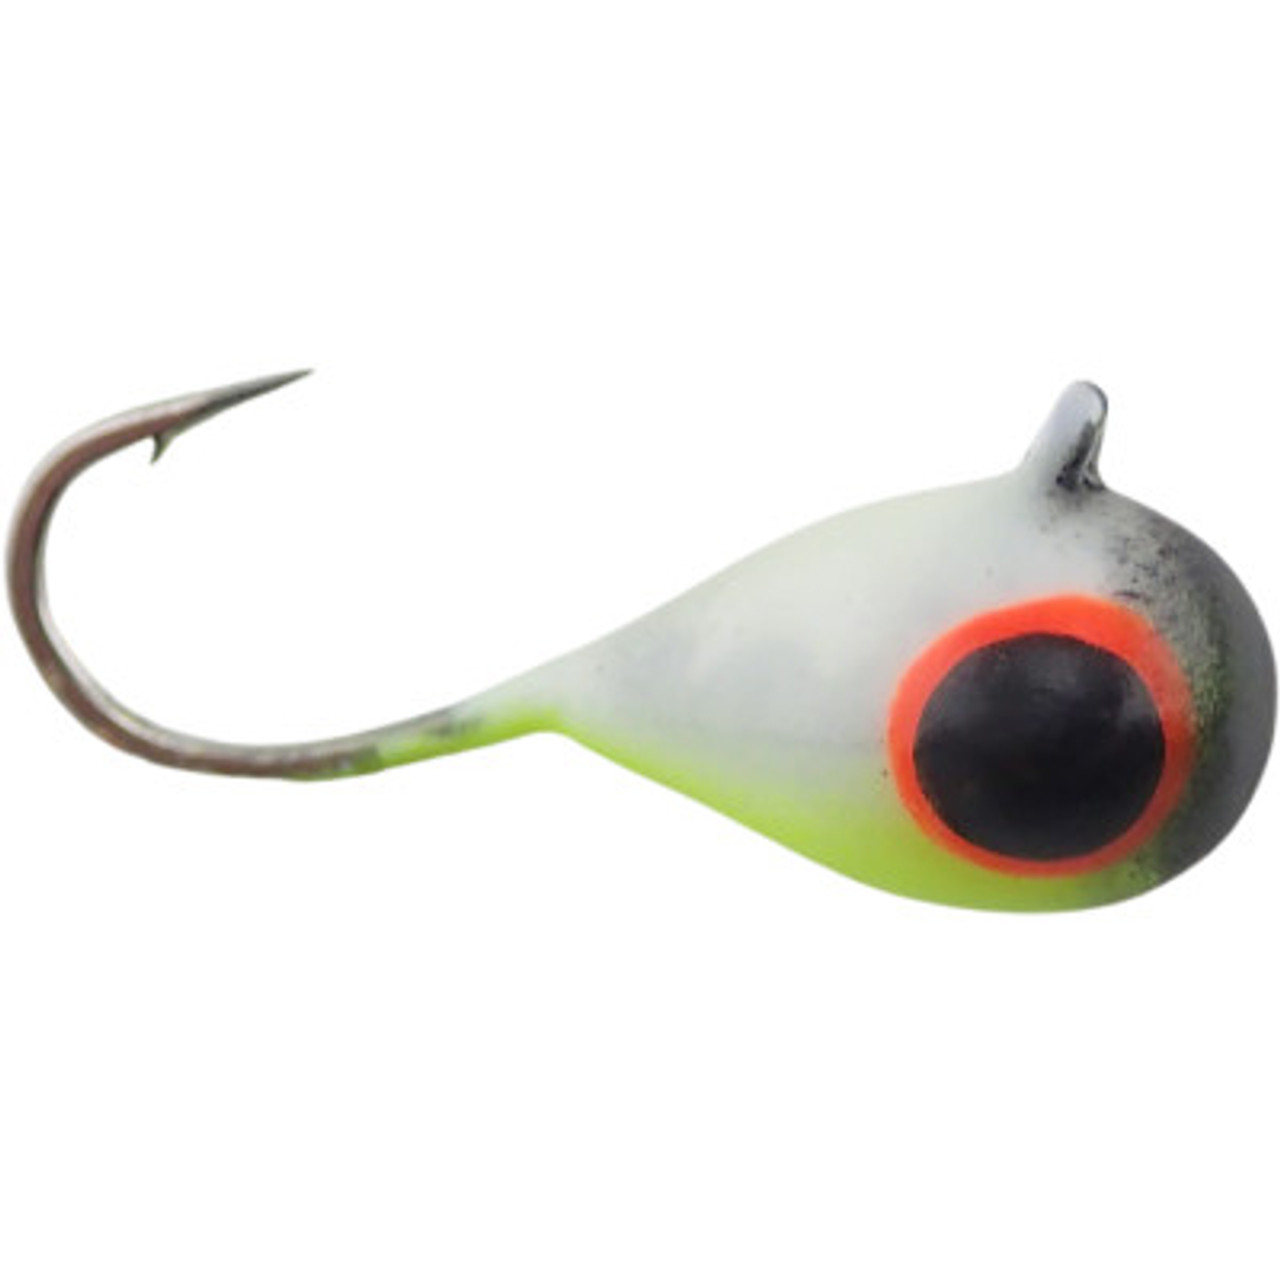 Widow Maker Lures Tungsten Dropper - Tackle Shack